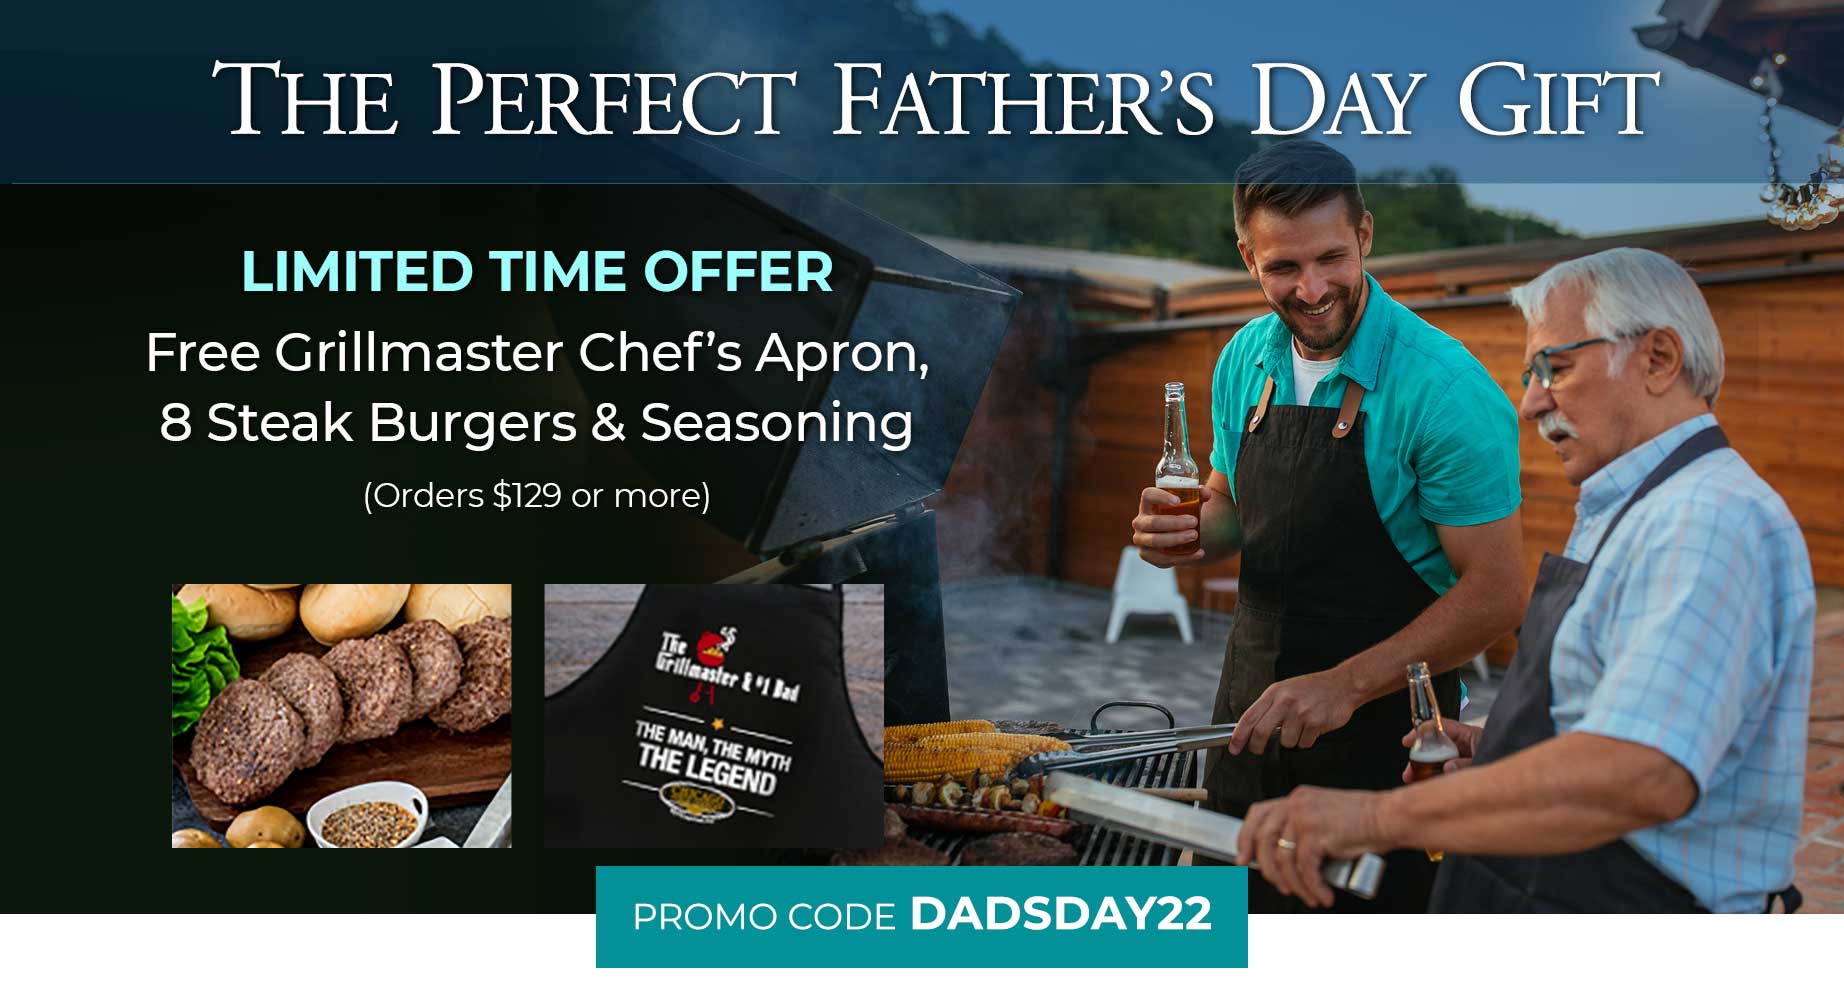 THE PERFECT FATHER'S DAY GIFT- Limited time offer: FREE standard shipping + Free Grillmaster Chef's Apron, 8 Steak Burgers & seasoning - Orders $129 or more Promo Code: DADSDAY22